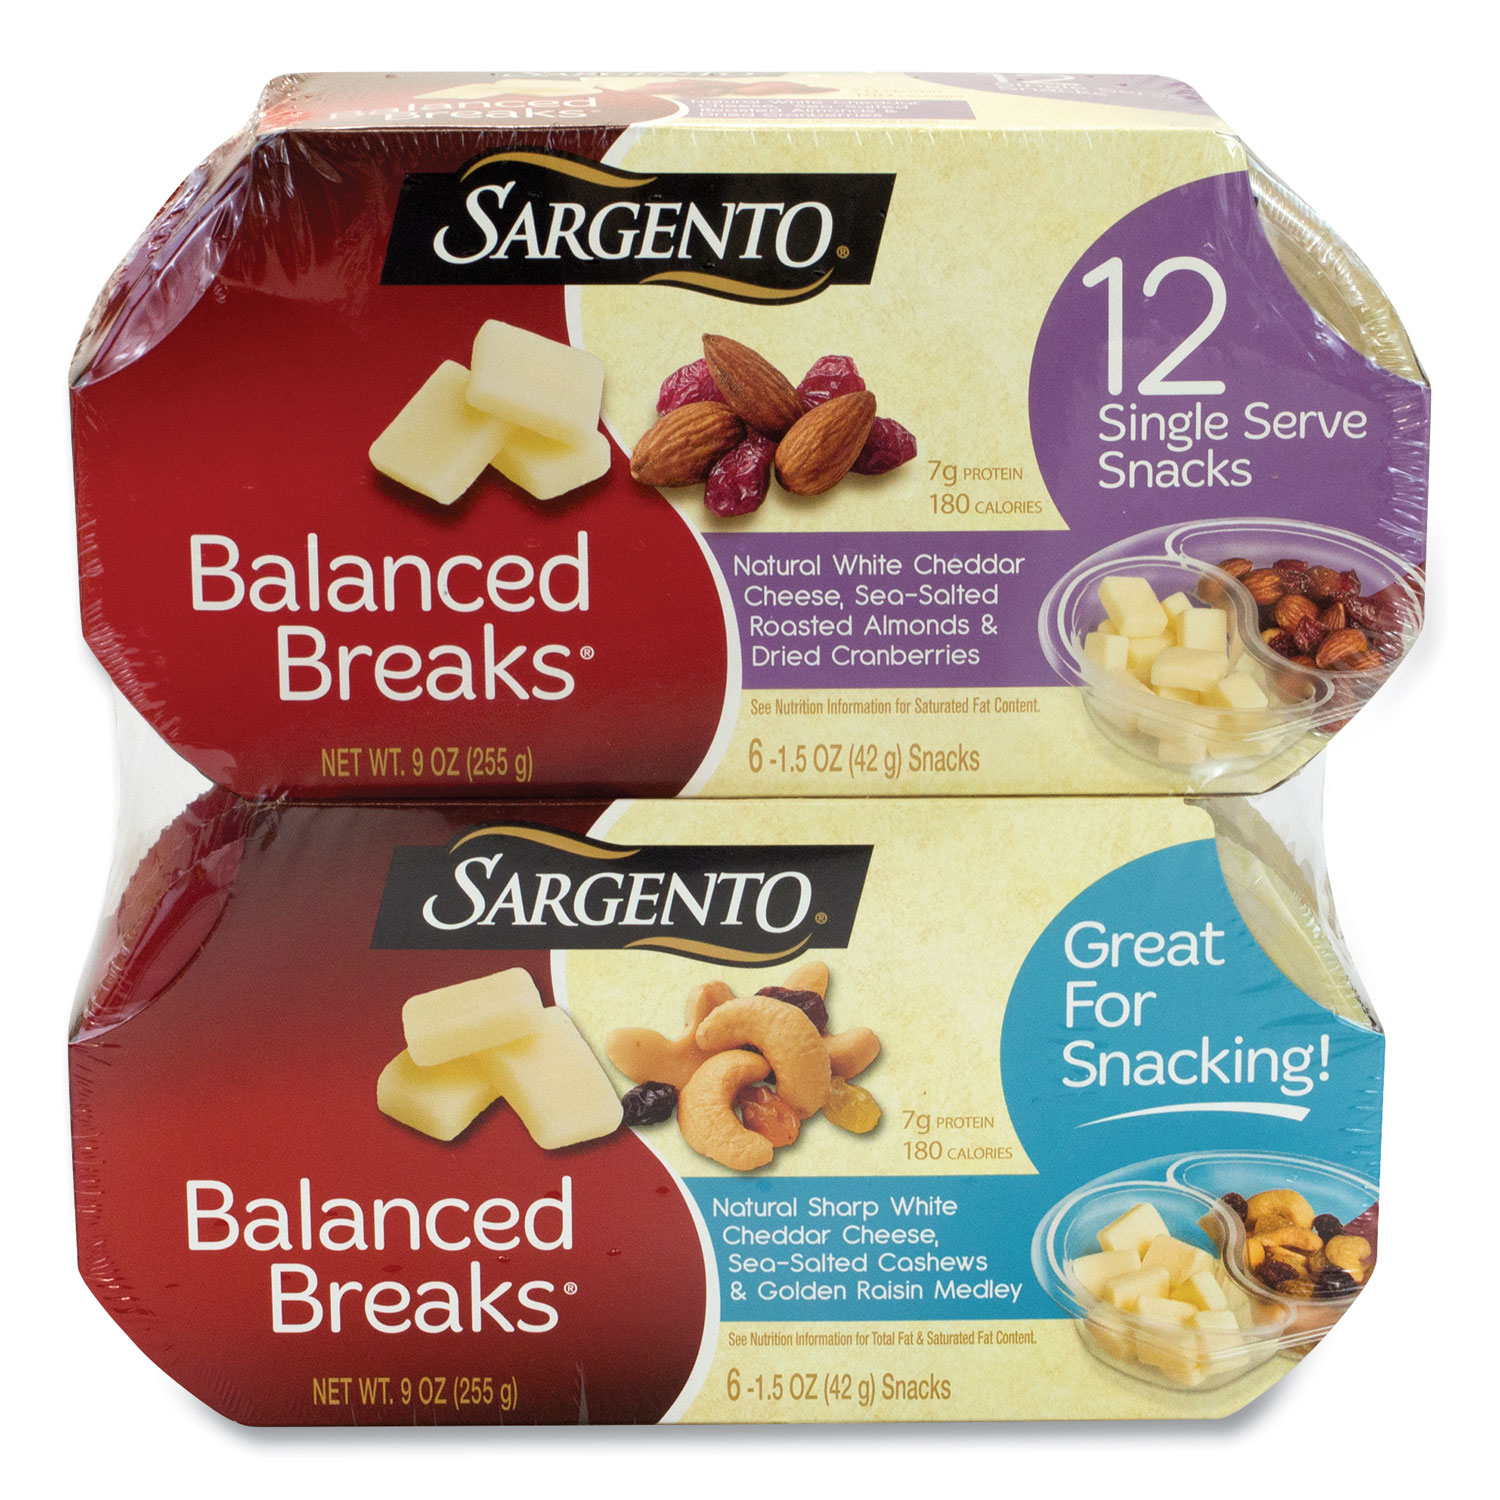 Sargento® Balanced Breaks, Two Assorted Flavor Packs, 1.5 oz Pack, 12 Packs/Box, Free Delivery in 1-4 Business Days